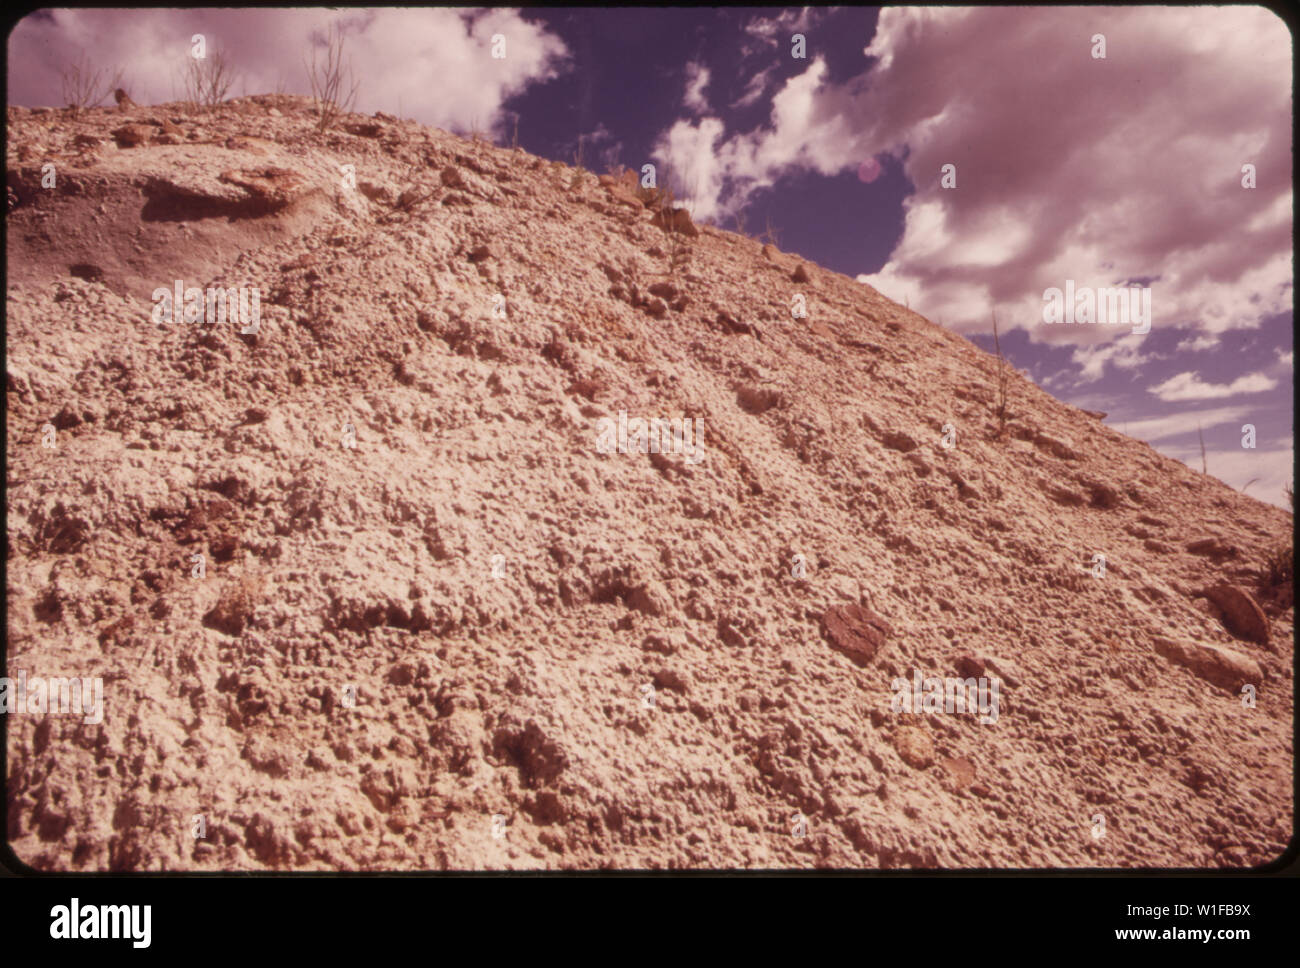 IN 20 YEARS NOTHING HAS GROWN ON THIS OLD SPOIL PILE FROM A STRIP MINE NEAR COLSTRIP Stock Photo